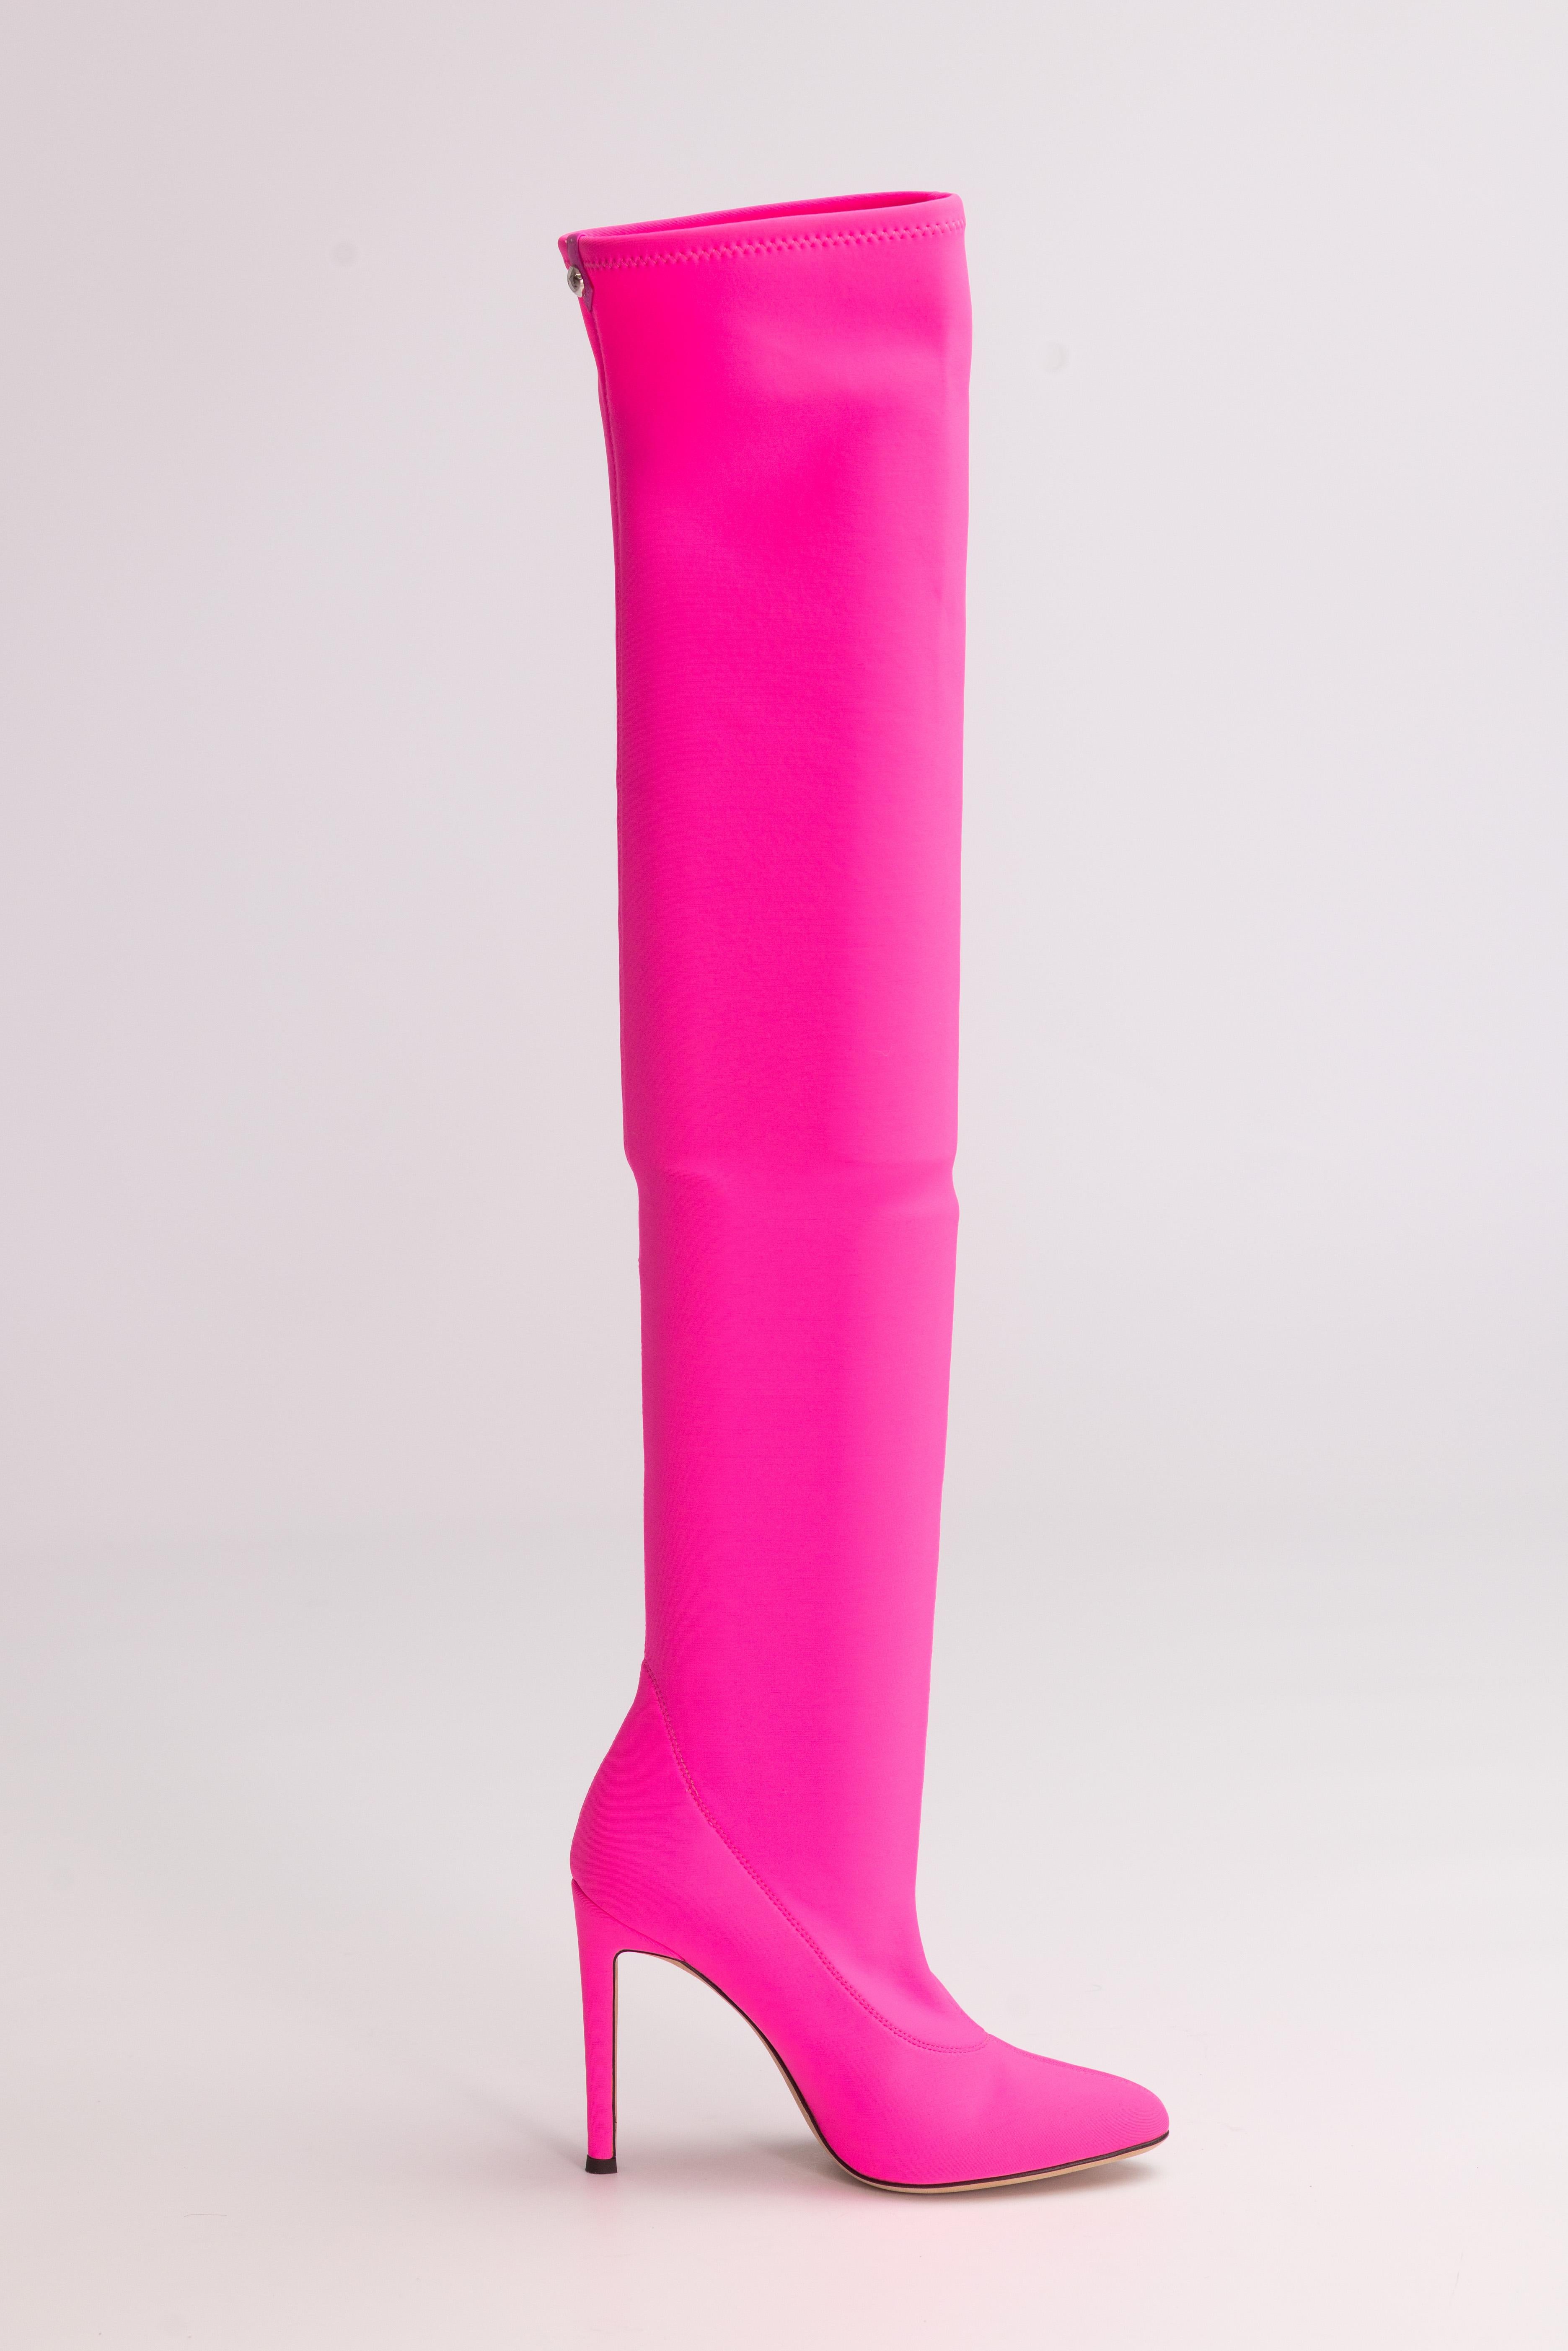 GIUSEPPE ZANOTTI HOT PINK KNEE HIGH HEELED BOOTS (EU 36)

Stretch bonded jersey over-the-knee boots in fluorescent pink. Almond toe. Tonal leather tab with silver-tone logo plaque at elasticized collar. Covered stiletto heel. Leather sole in beige.